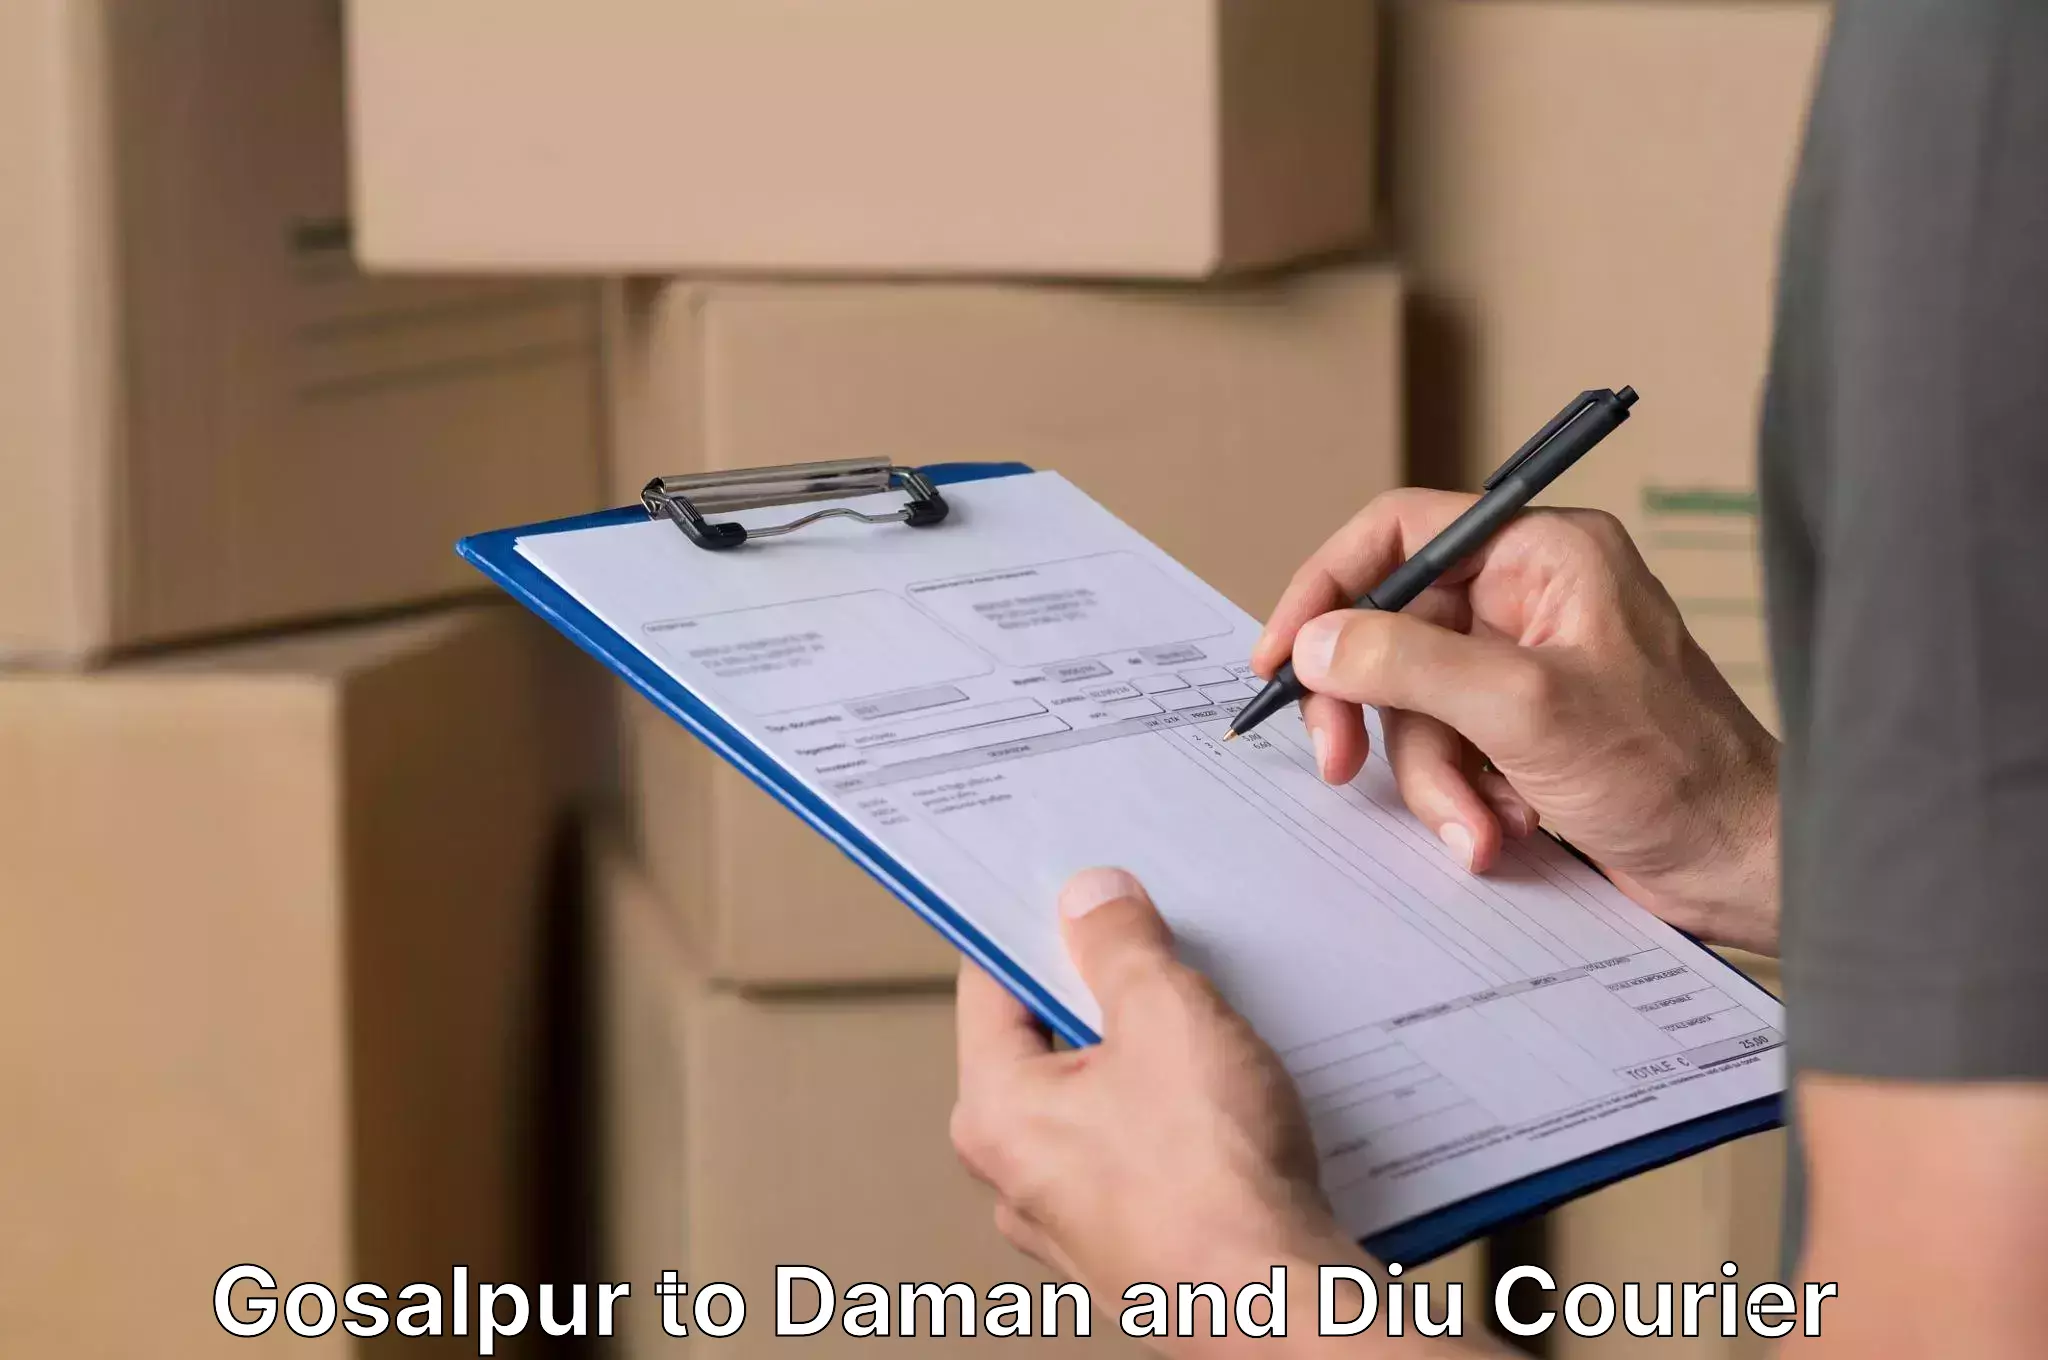 Affordable home movers Gosalpur to Daman and Diu